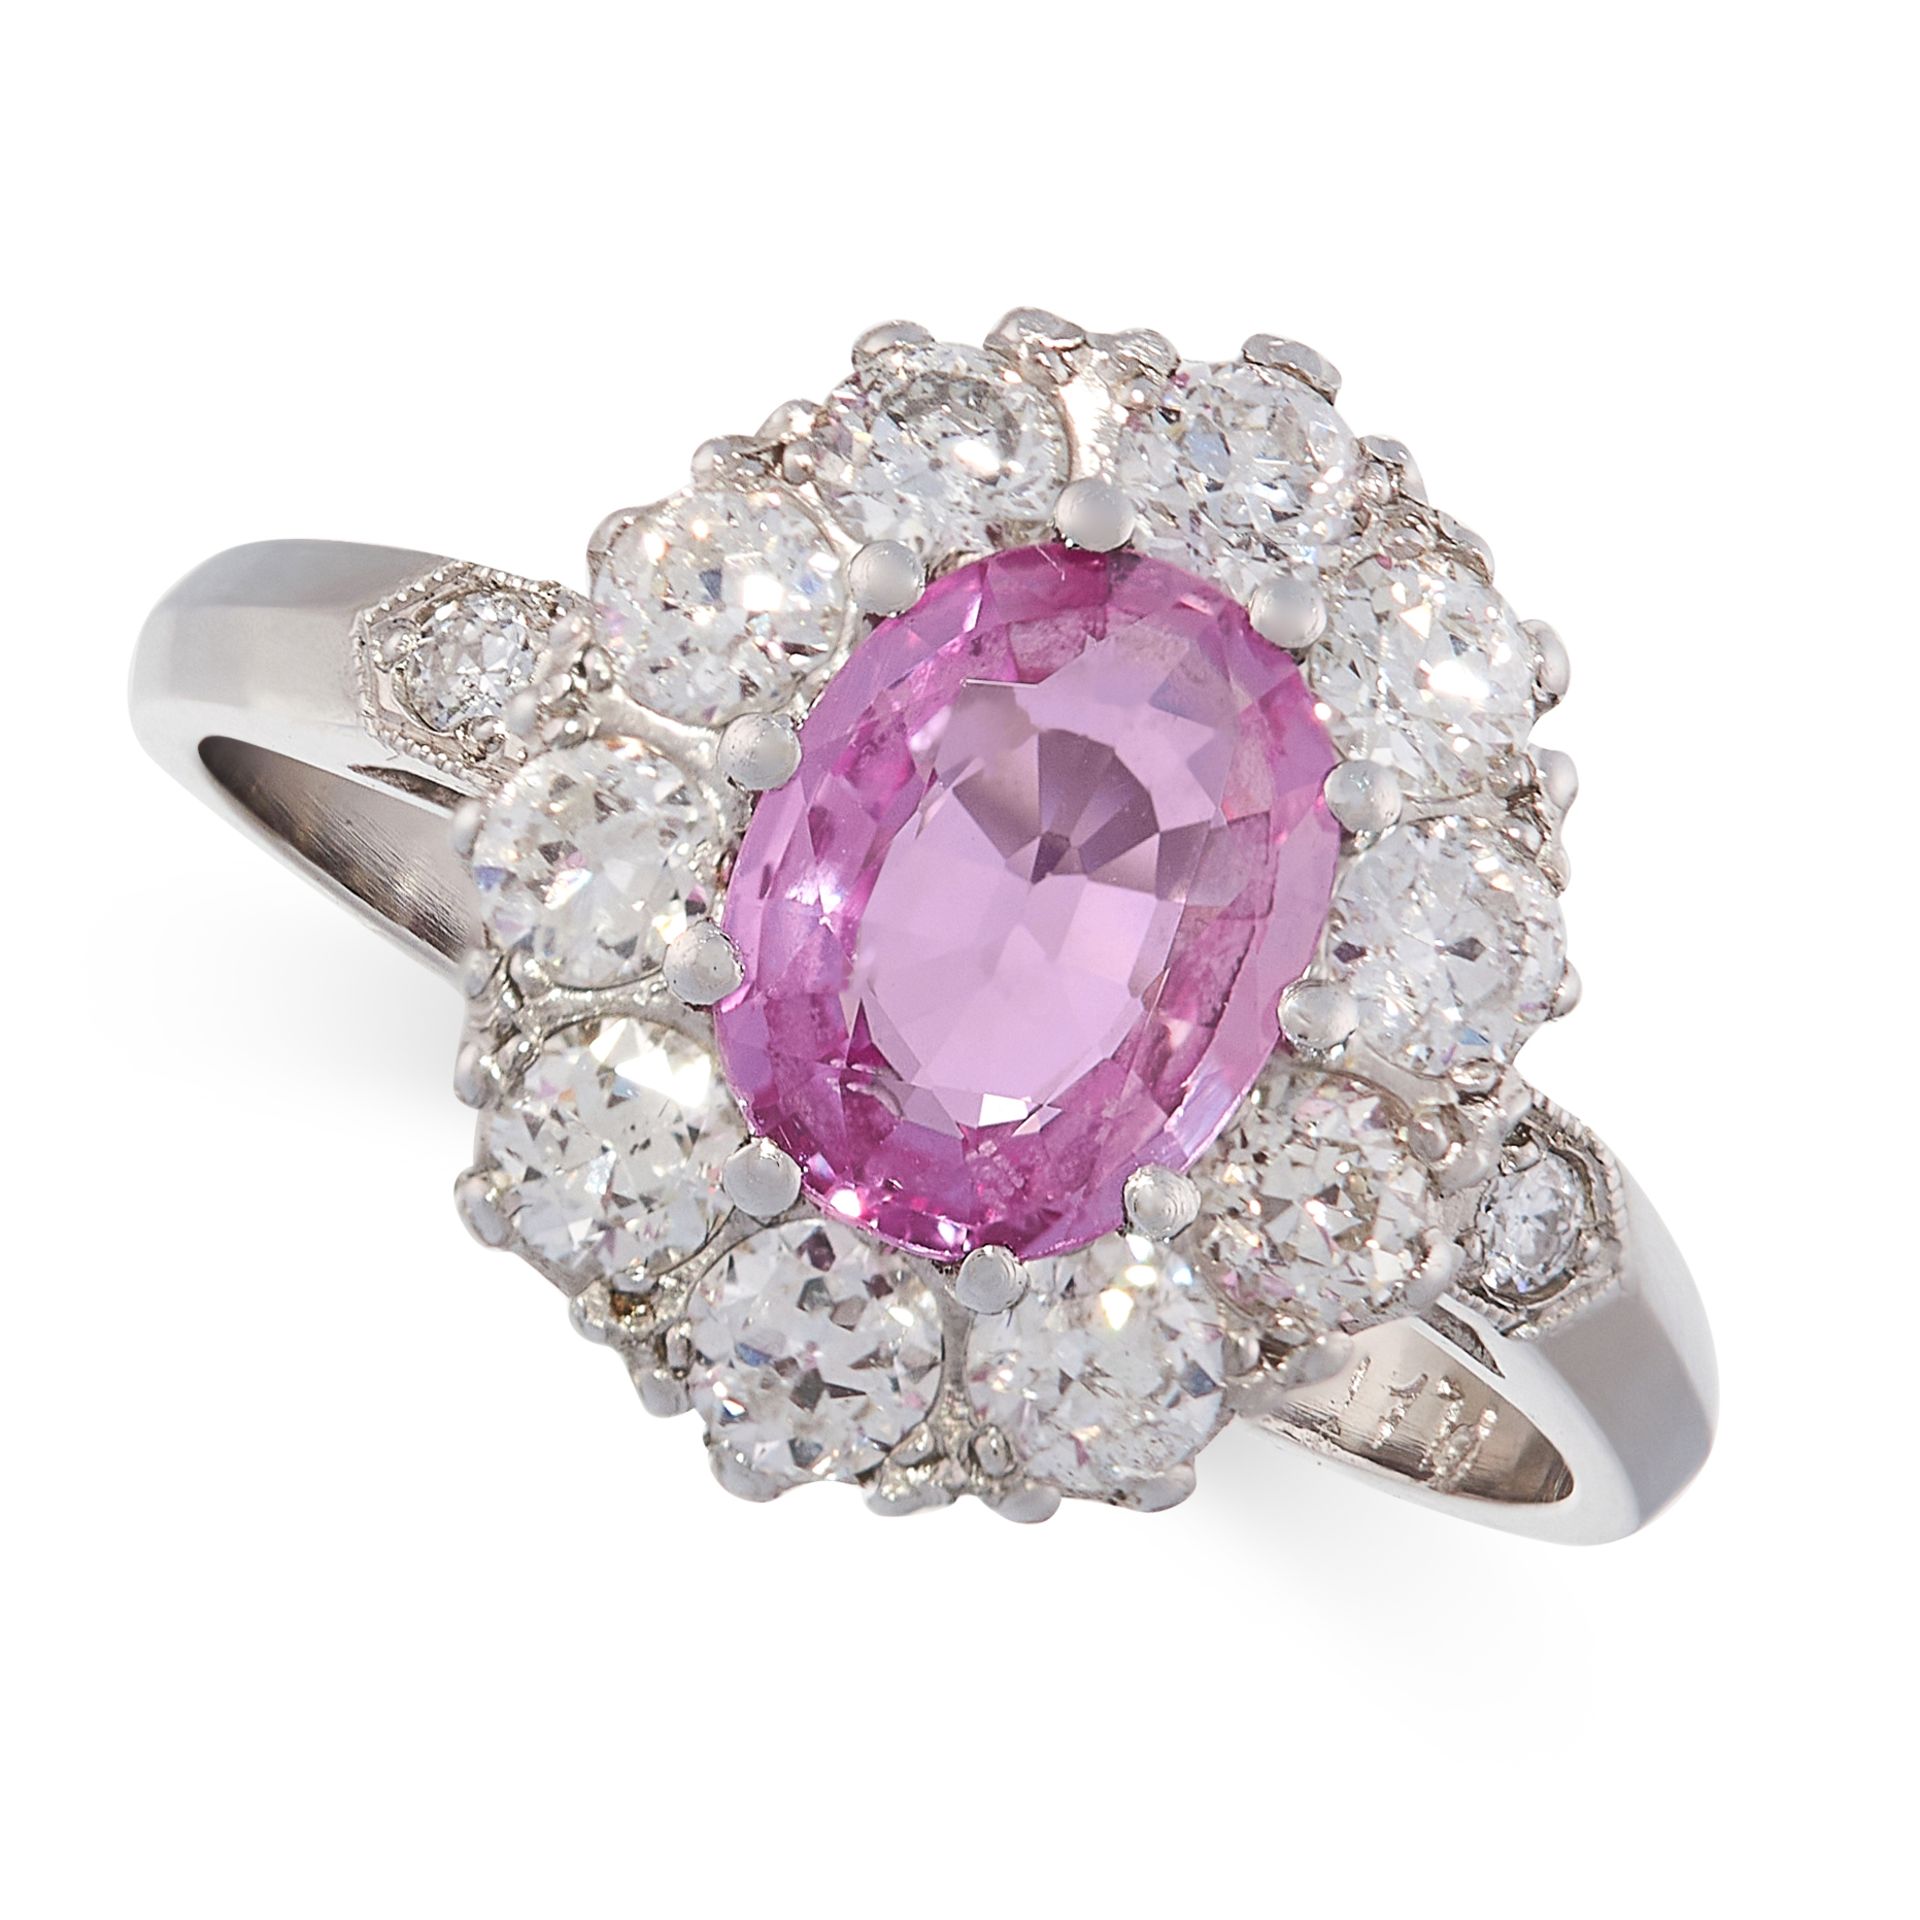 PINK SAPPHIRE AND DIAMOND RING set with an oval cut pink sapphire of 1.40 carats in a cluster of